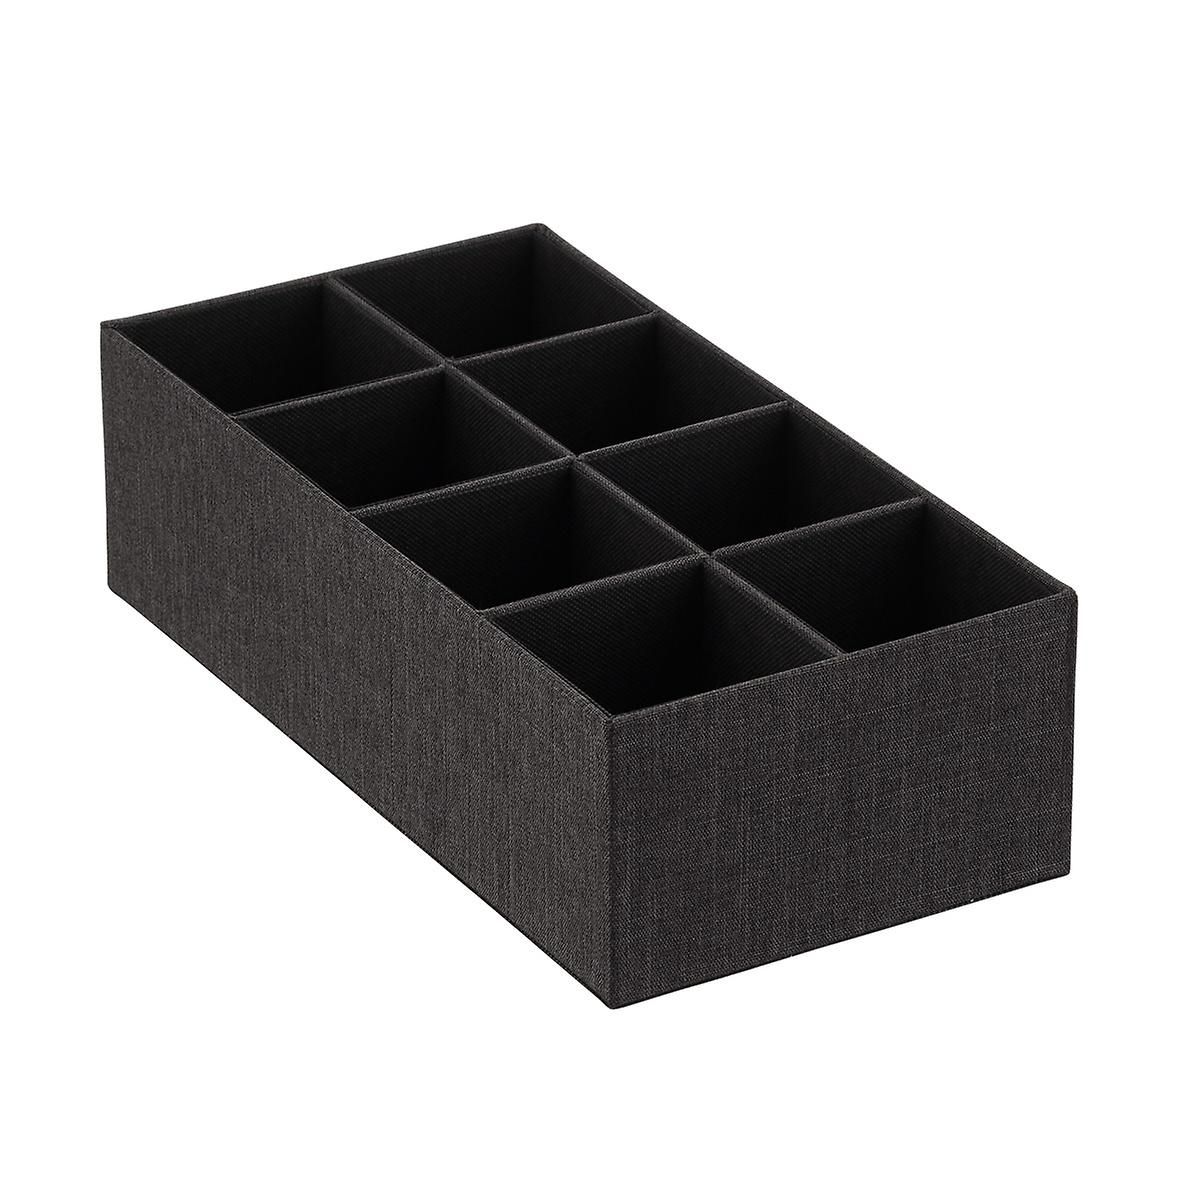 Black Cambridge Drawer Organizers | The Container Store